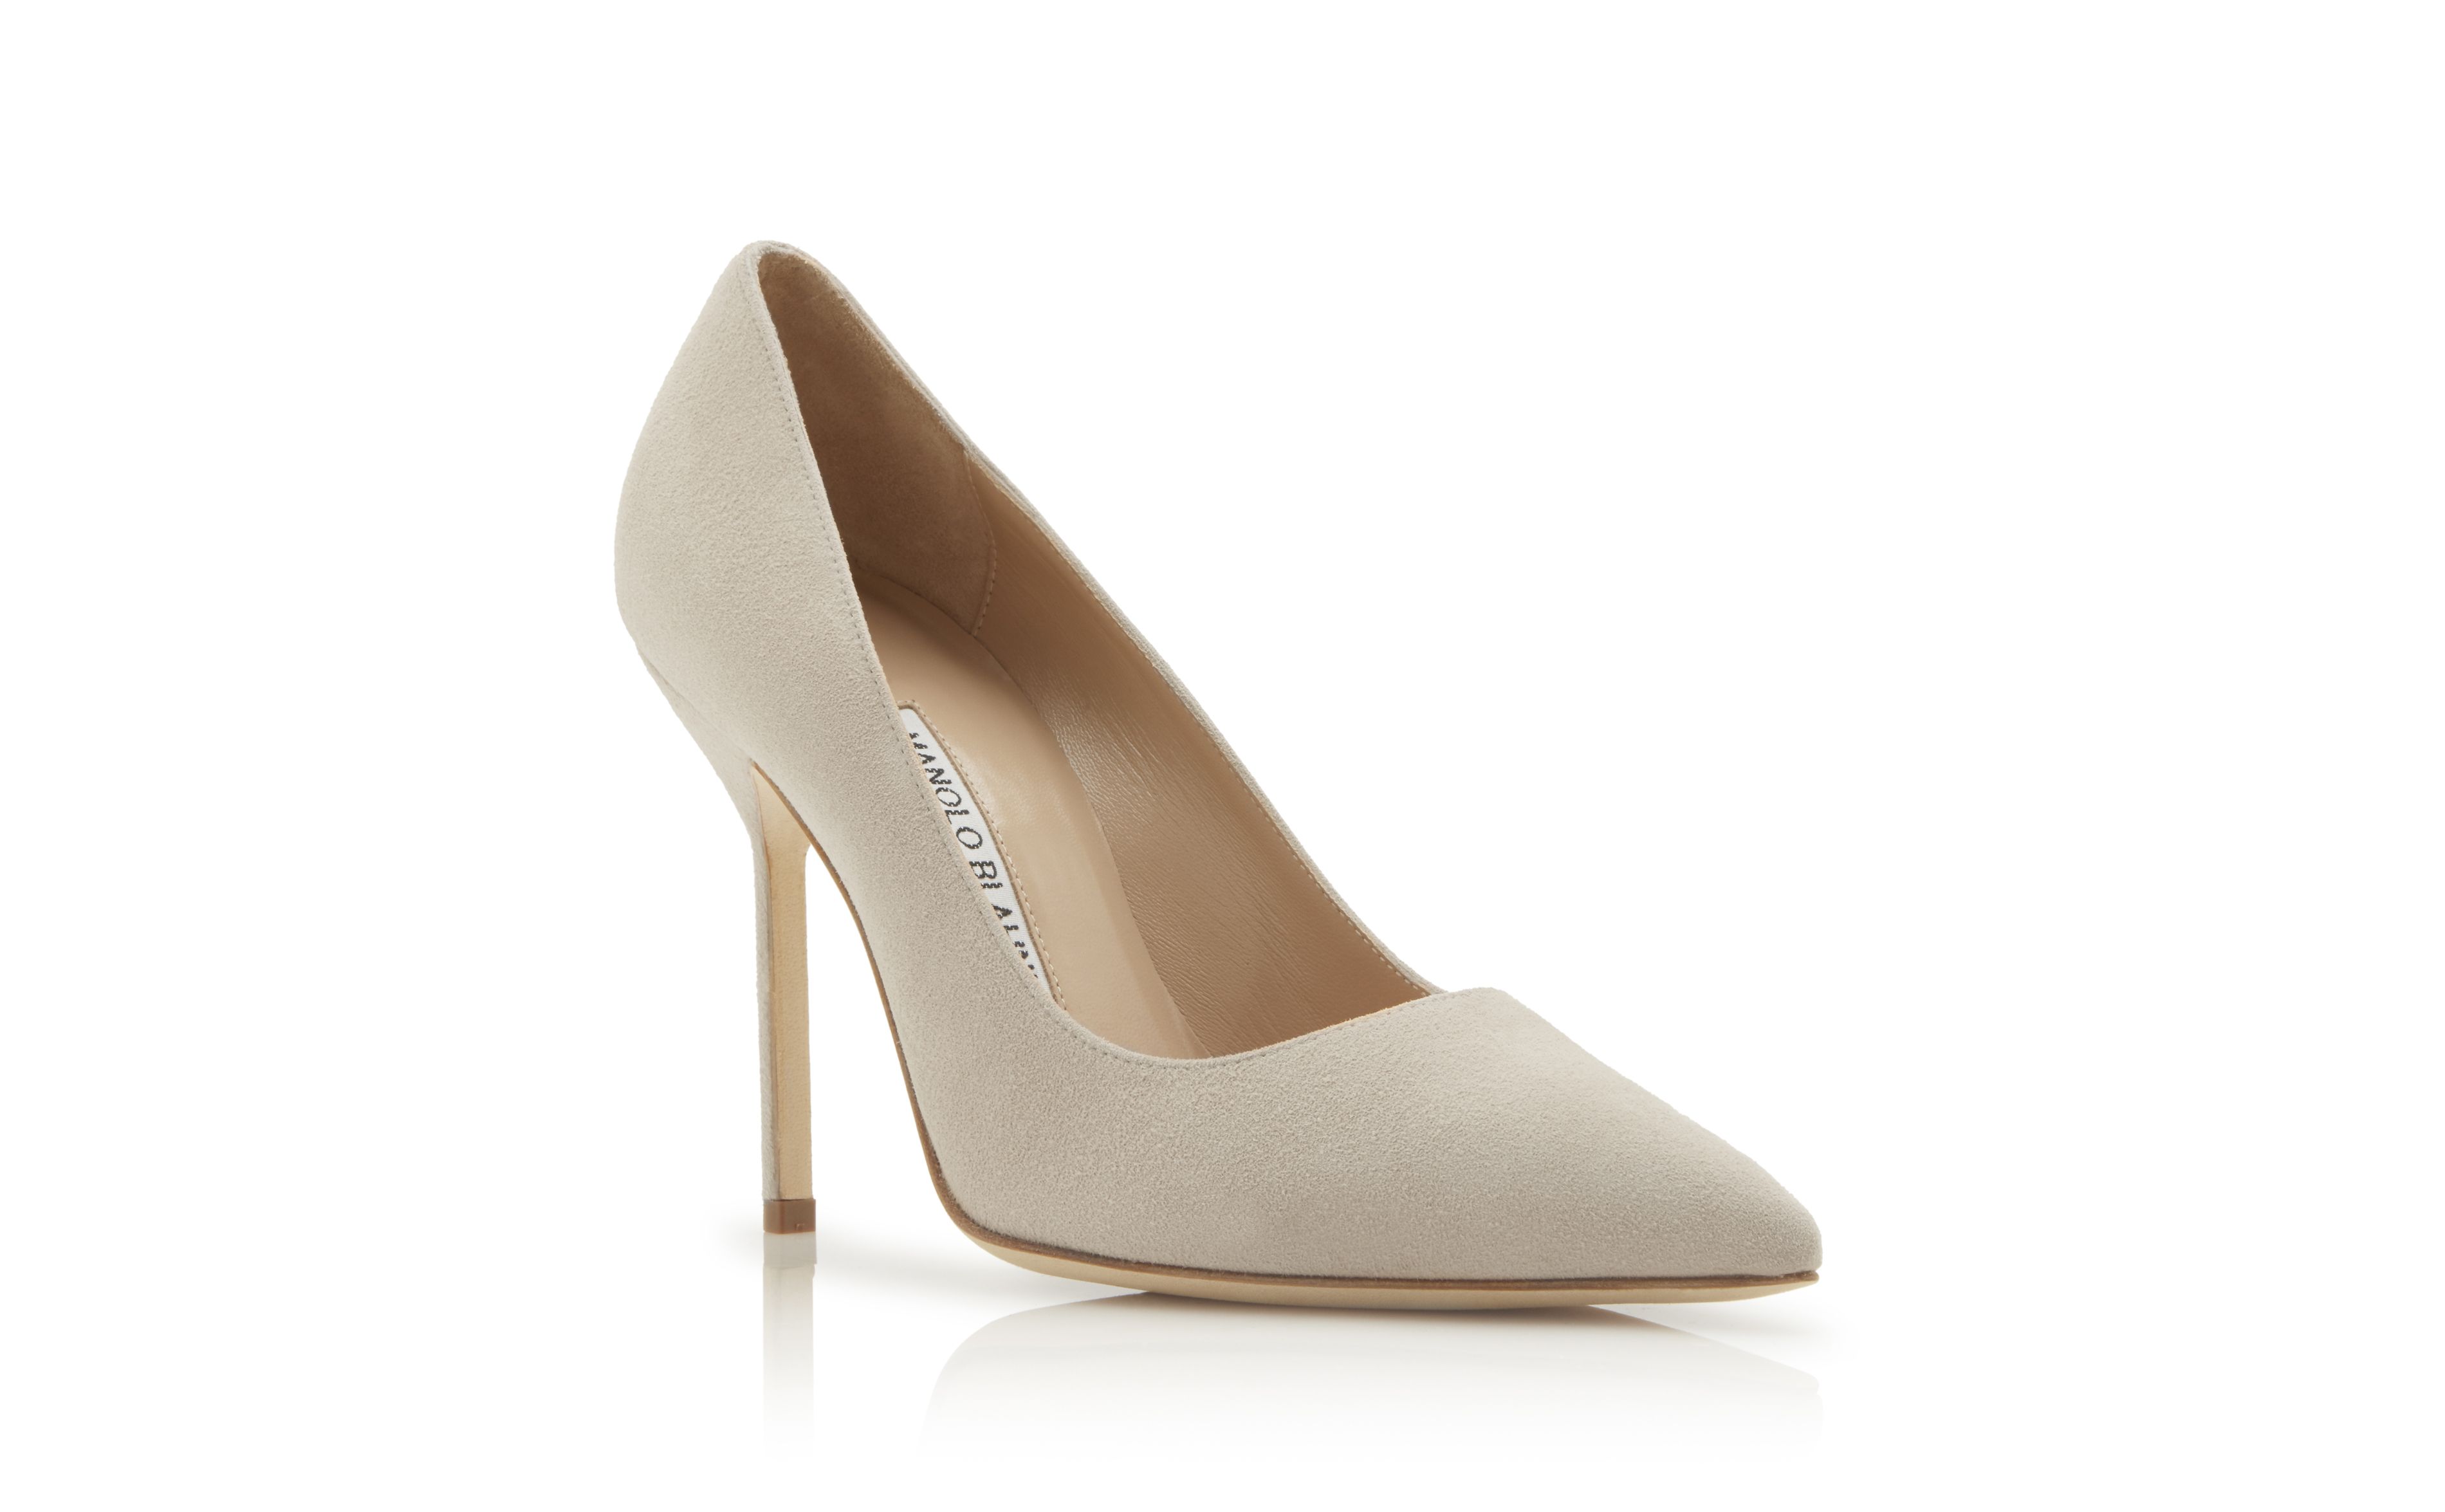 Designer Stone Suede Pointed Toe Pumps - Image Upsell